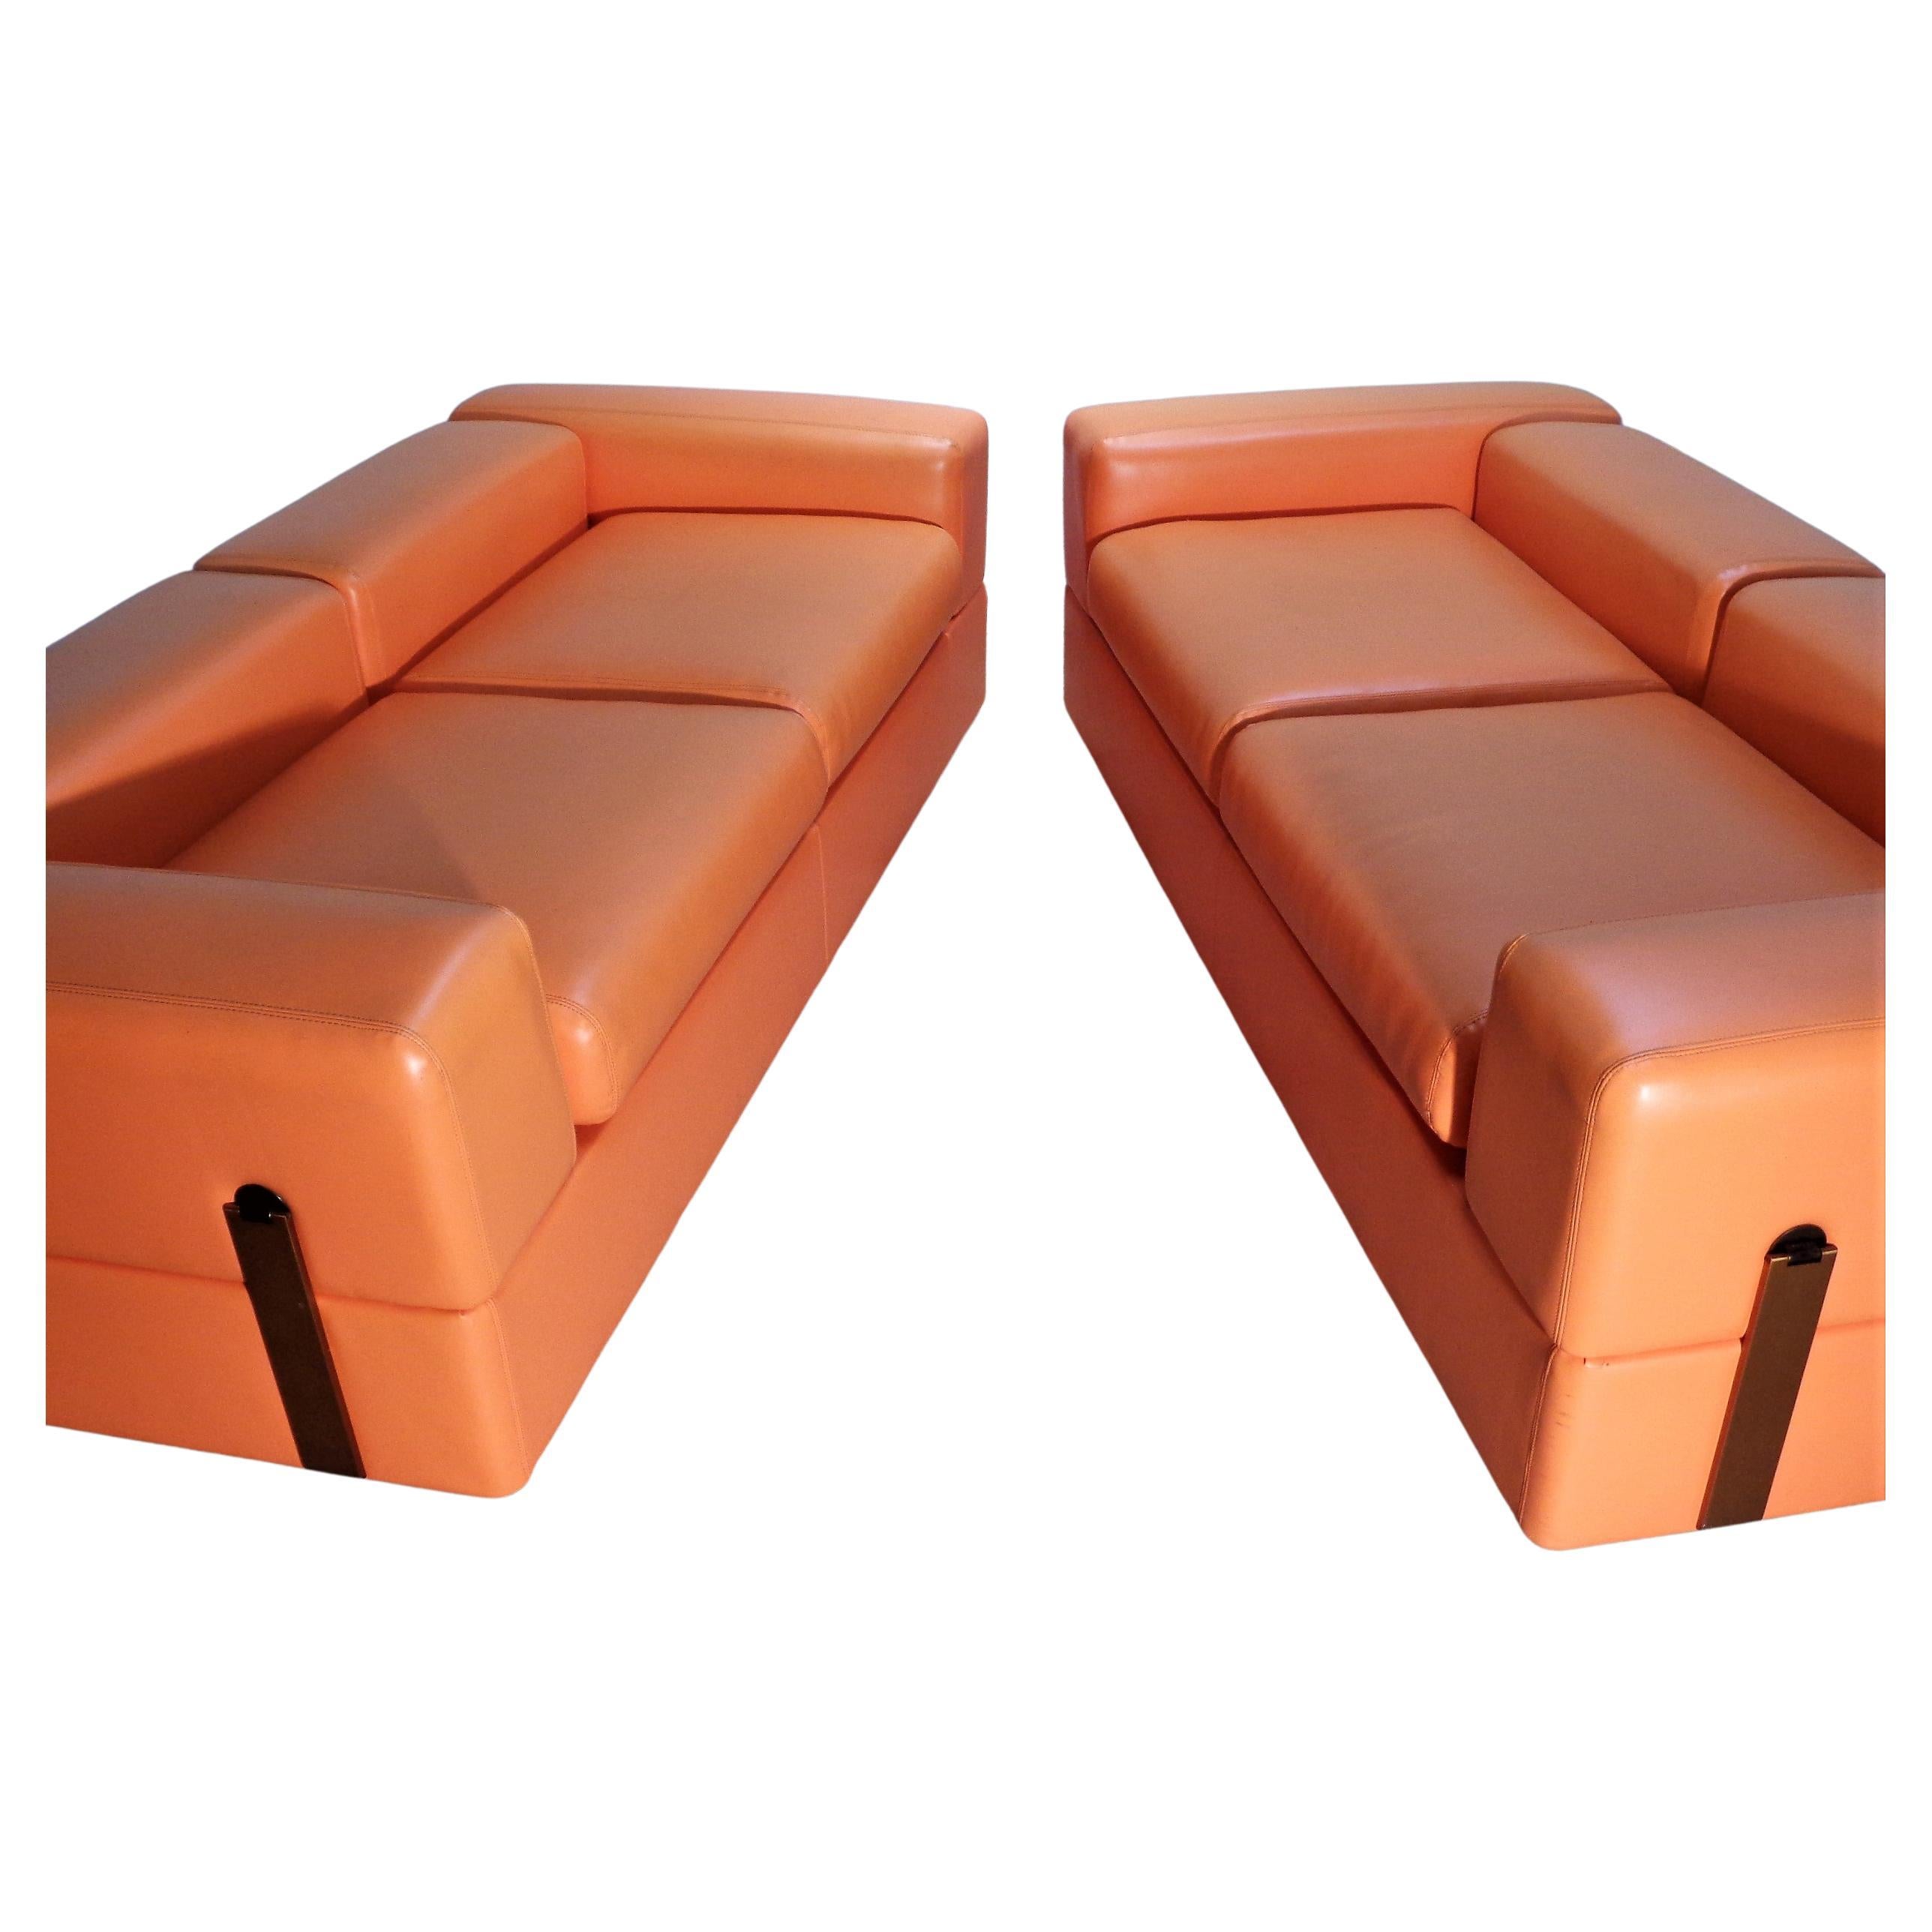 Model 711 daybed sofas by Tito Agnoli for Cinova, c. 1960's, Italy. Original finely stitched creamsicle orange textured vinyl upholstery. Arms and back drop down easily converting sofas to day beds revealing white laminate side tables and back